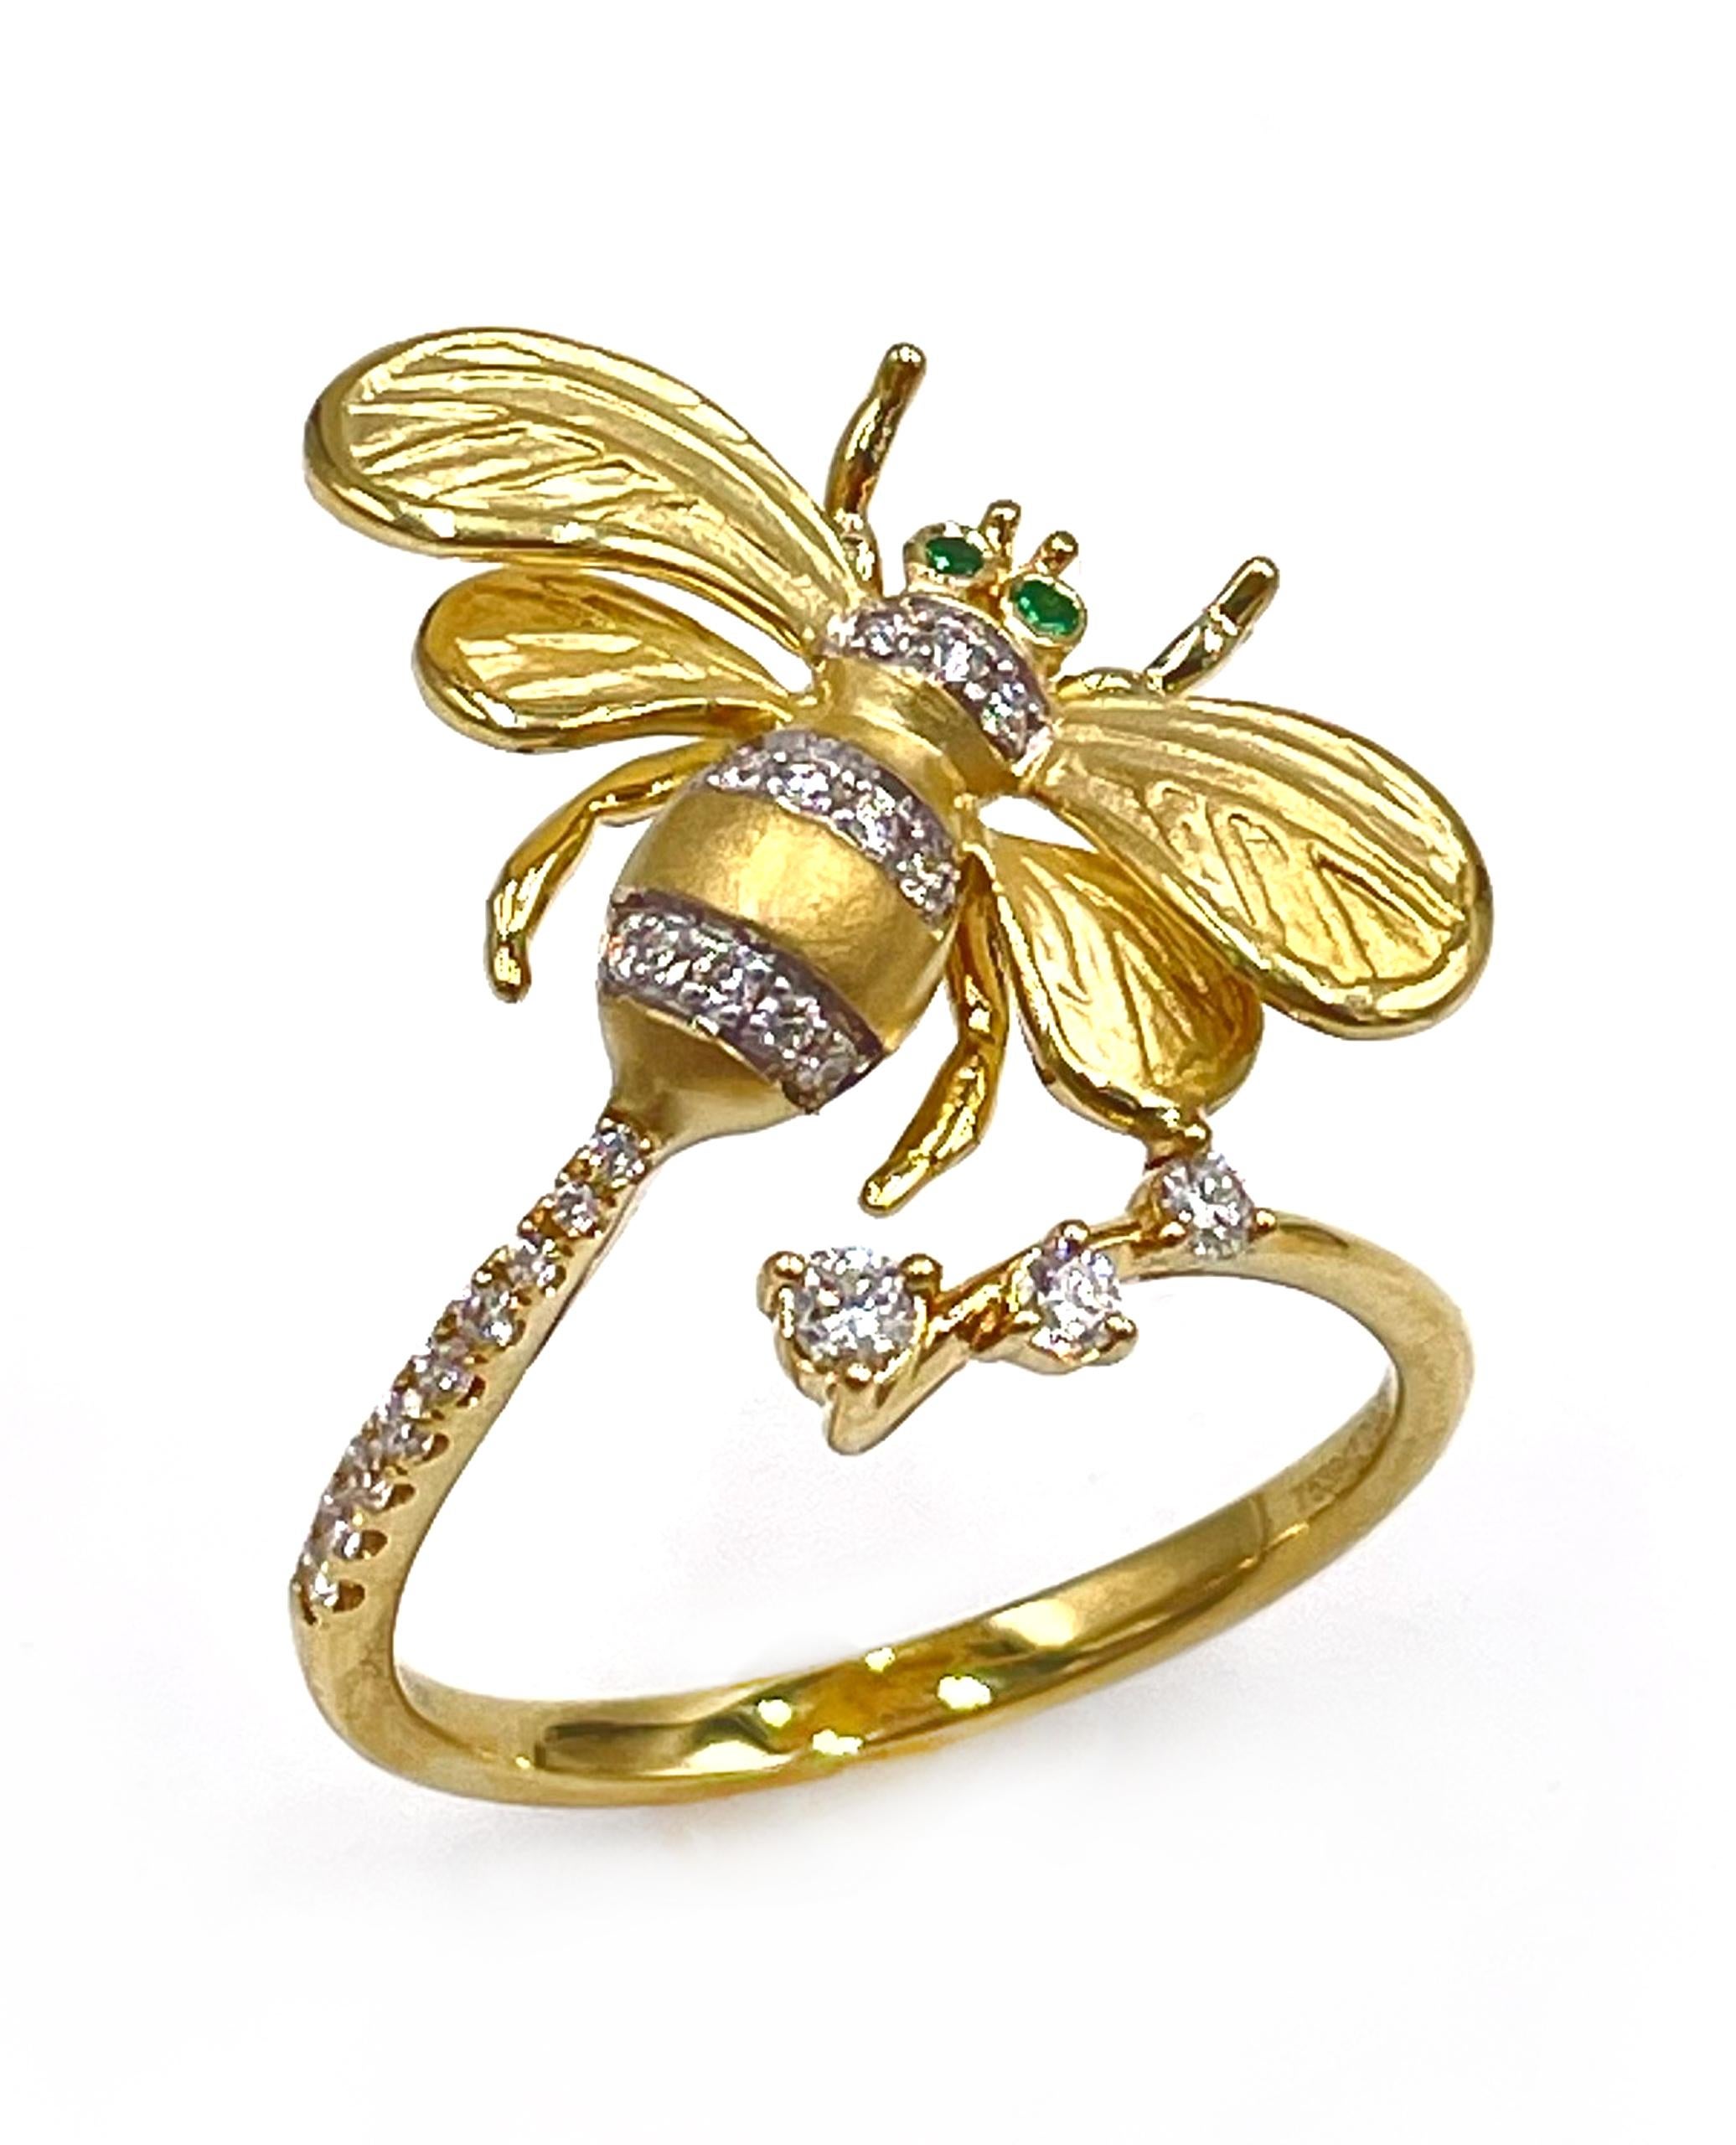 18K Yellow Gold Queen Bee Wrap Ring by Simon G. - DR380 In New Condition For Sale In Old Tappan, NJ